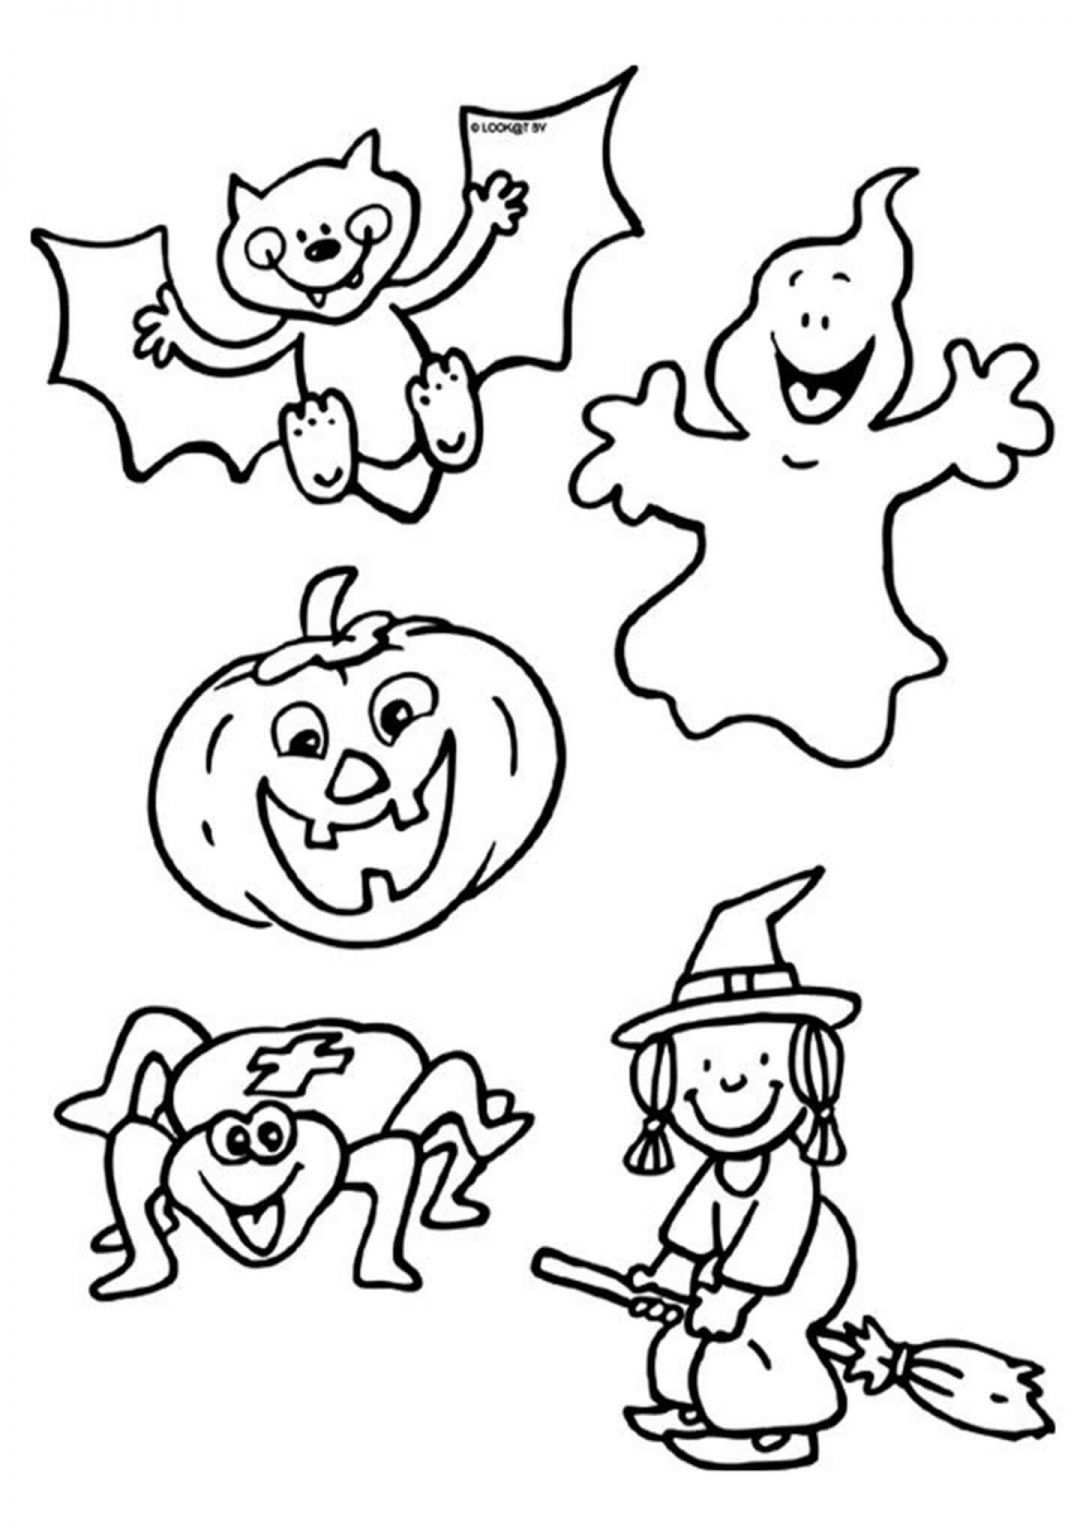 Free Easy To Print Halloween Coloring Pages Halloween Coloring Free Halloween Colorin